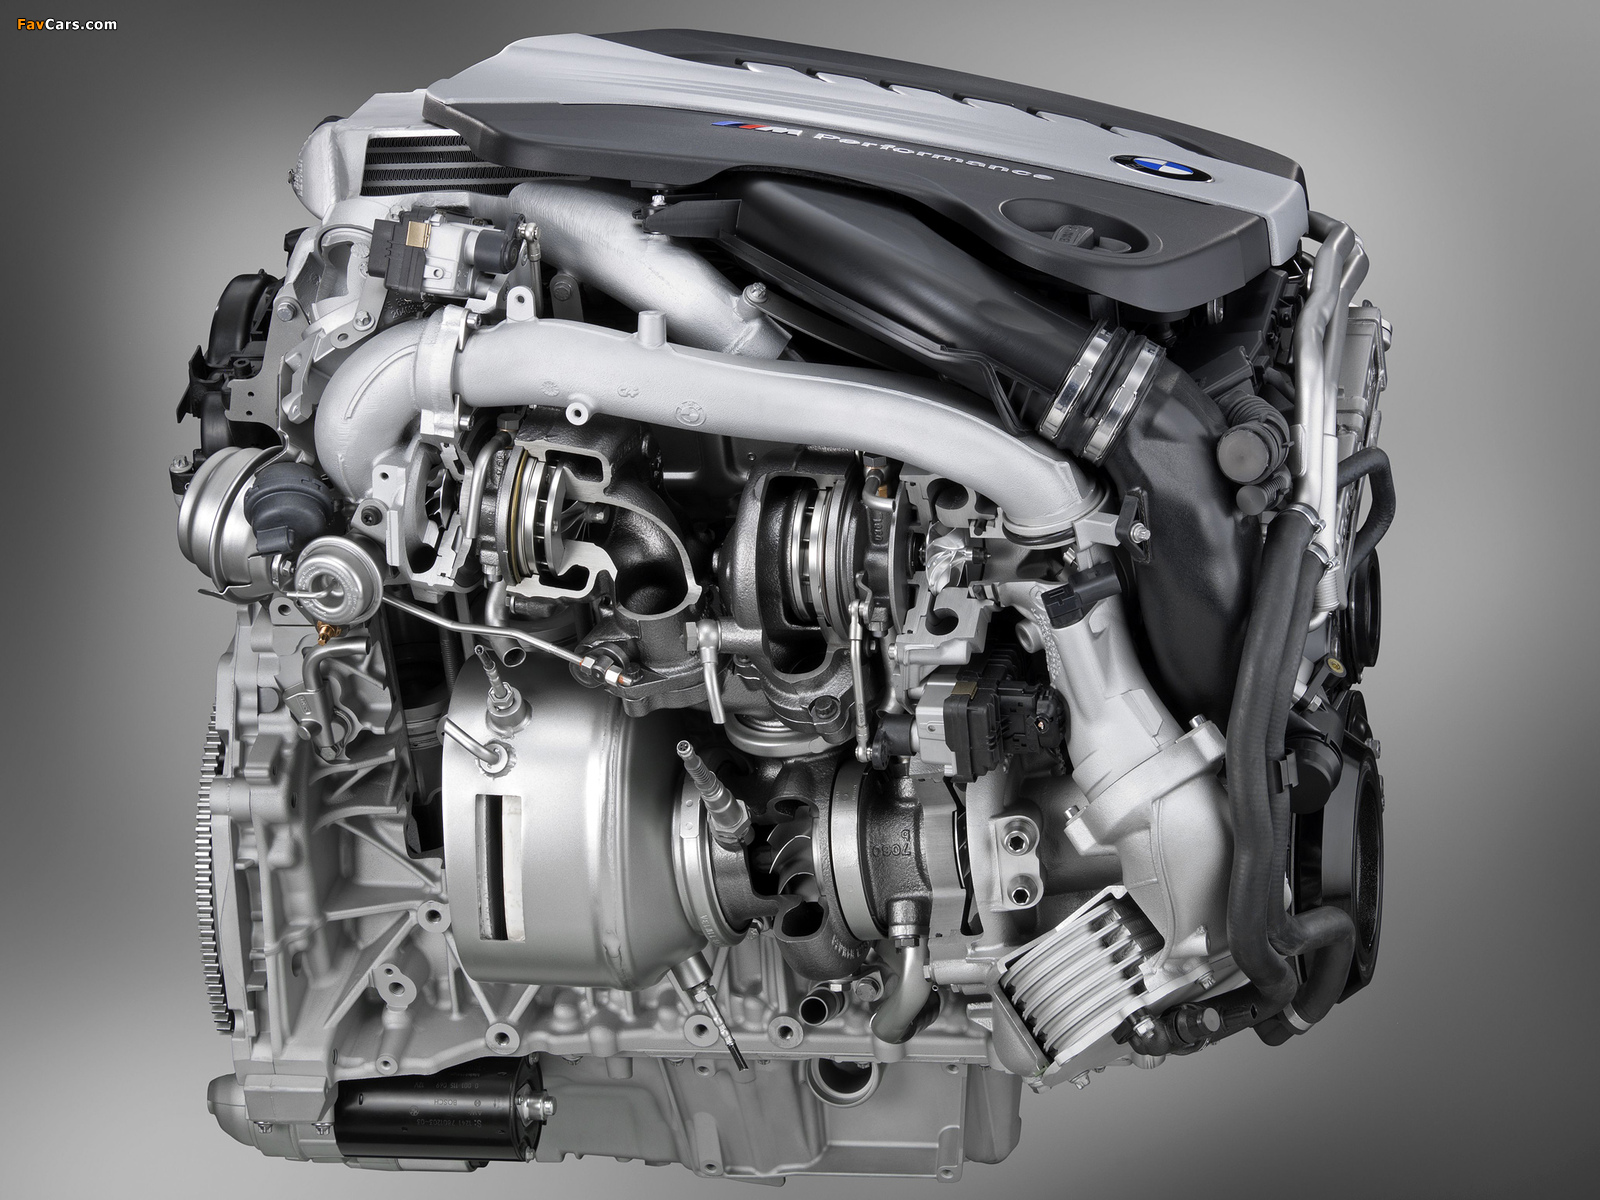 Photos of Engines BMW N57S (1600 x 1200)